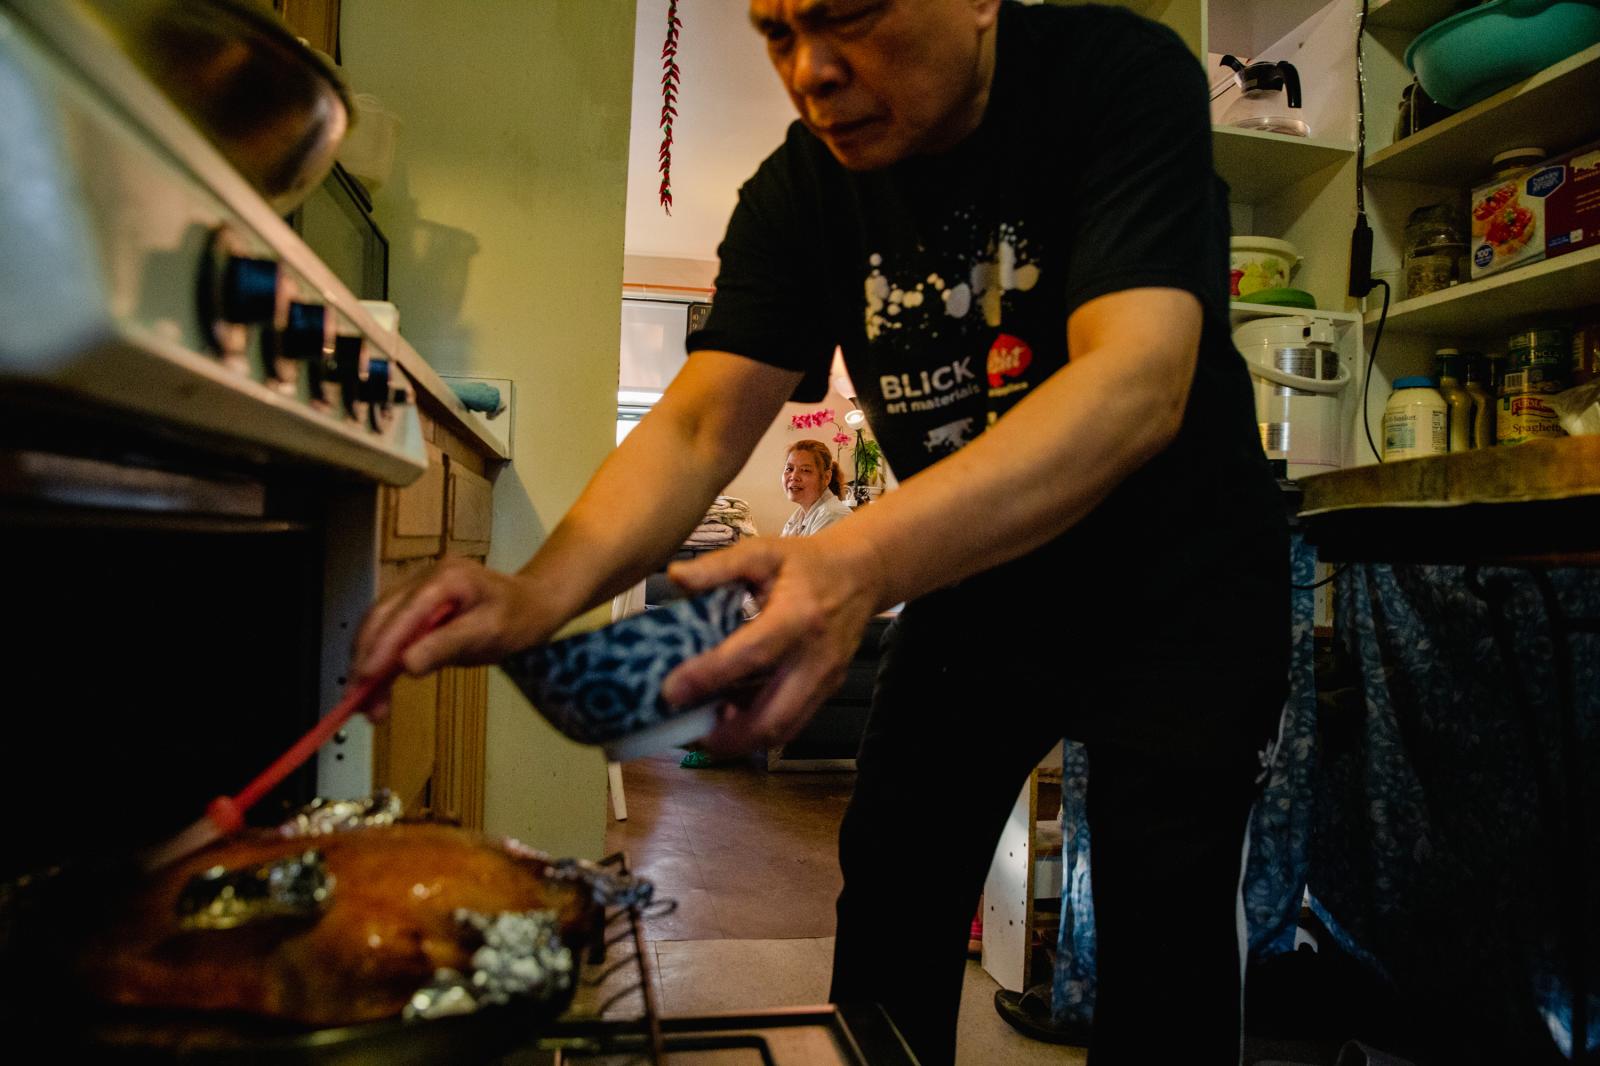 Image from NPR: Two Cantonese Women's Journey: A response to Atlanta Spa Shootings -  After work, Liang usually spends time making food with...